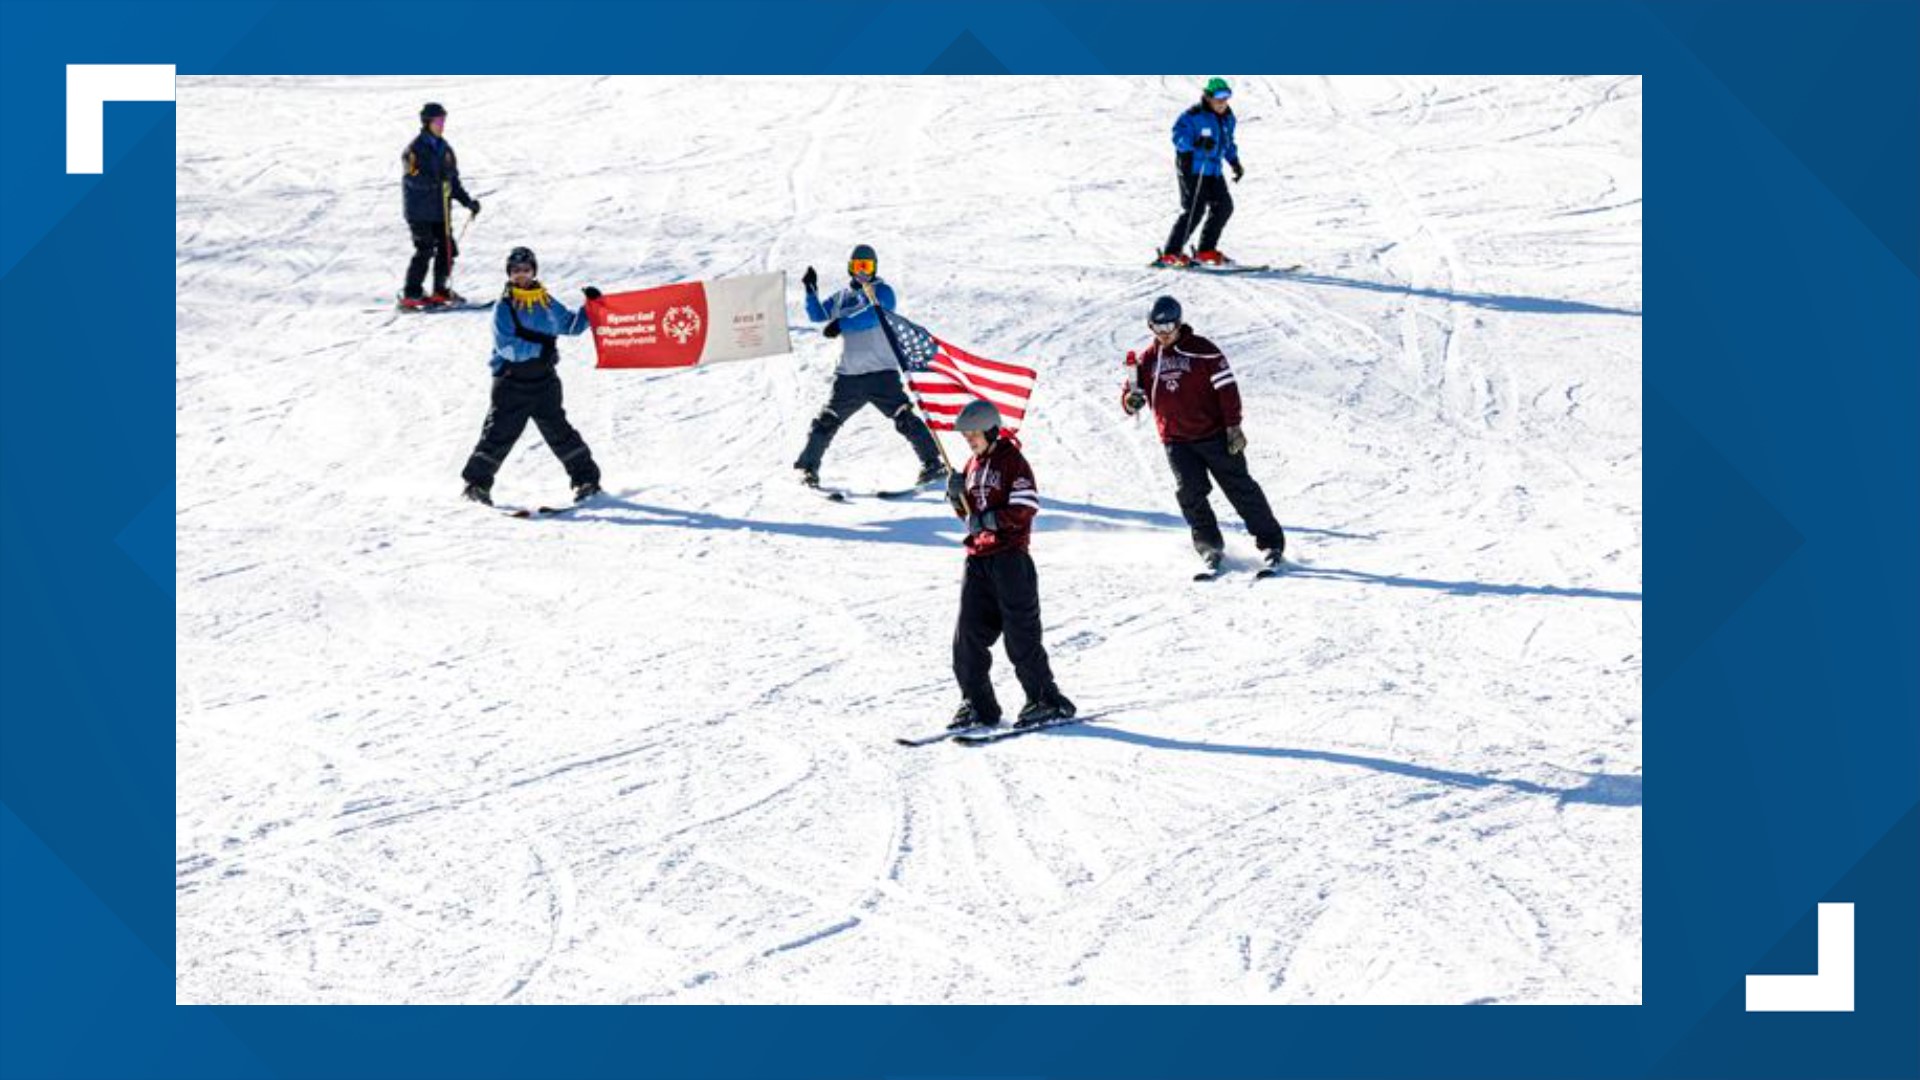 Around 30 athletes will be heading down the slopes to compete on Tuesday.